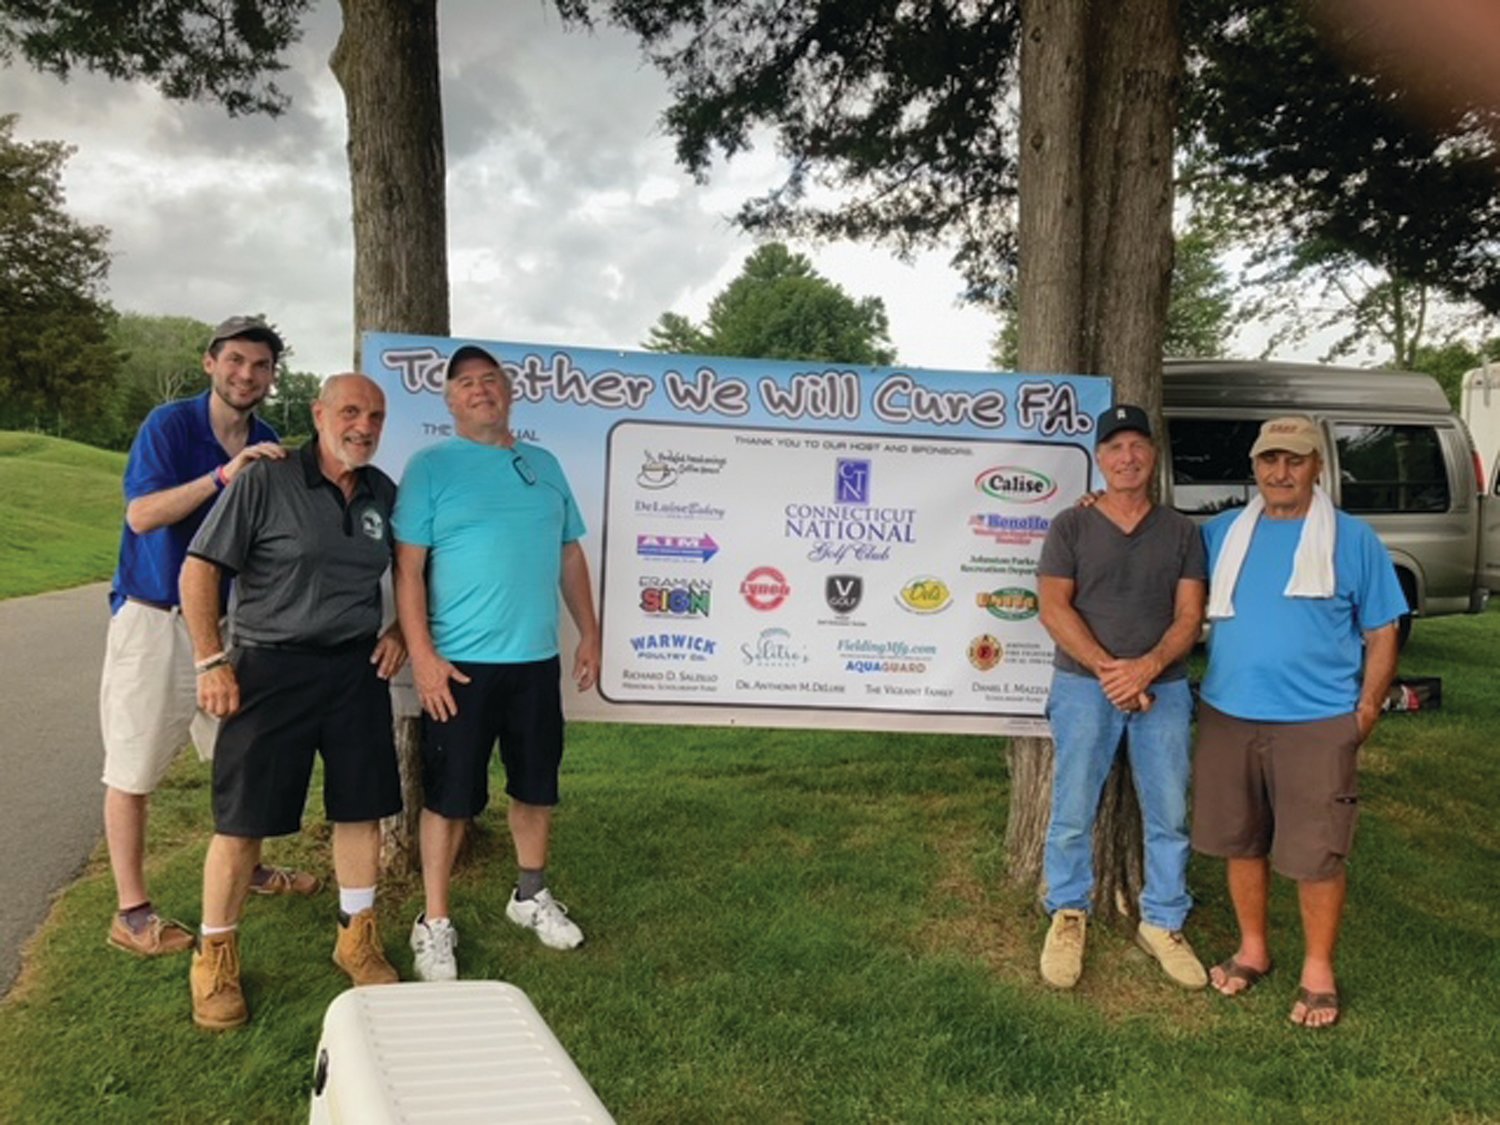 ABOVE PAR: From left to right, Alex Fielding, Jack DiIorio, Steve Westell, Mike Interlini, Vincent LaFazia pose for a group photo.